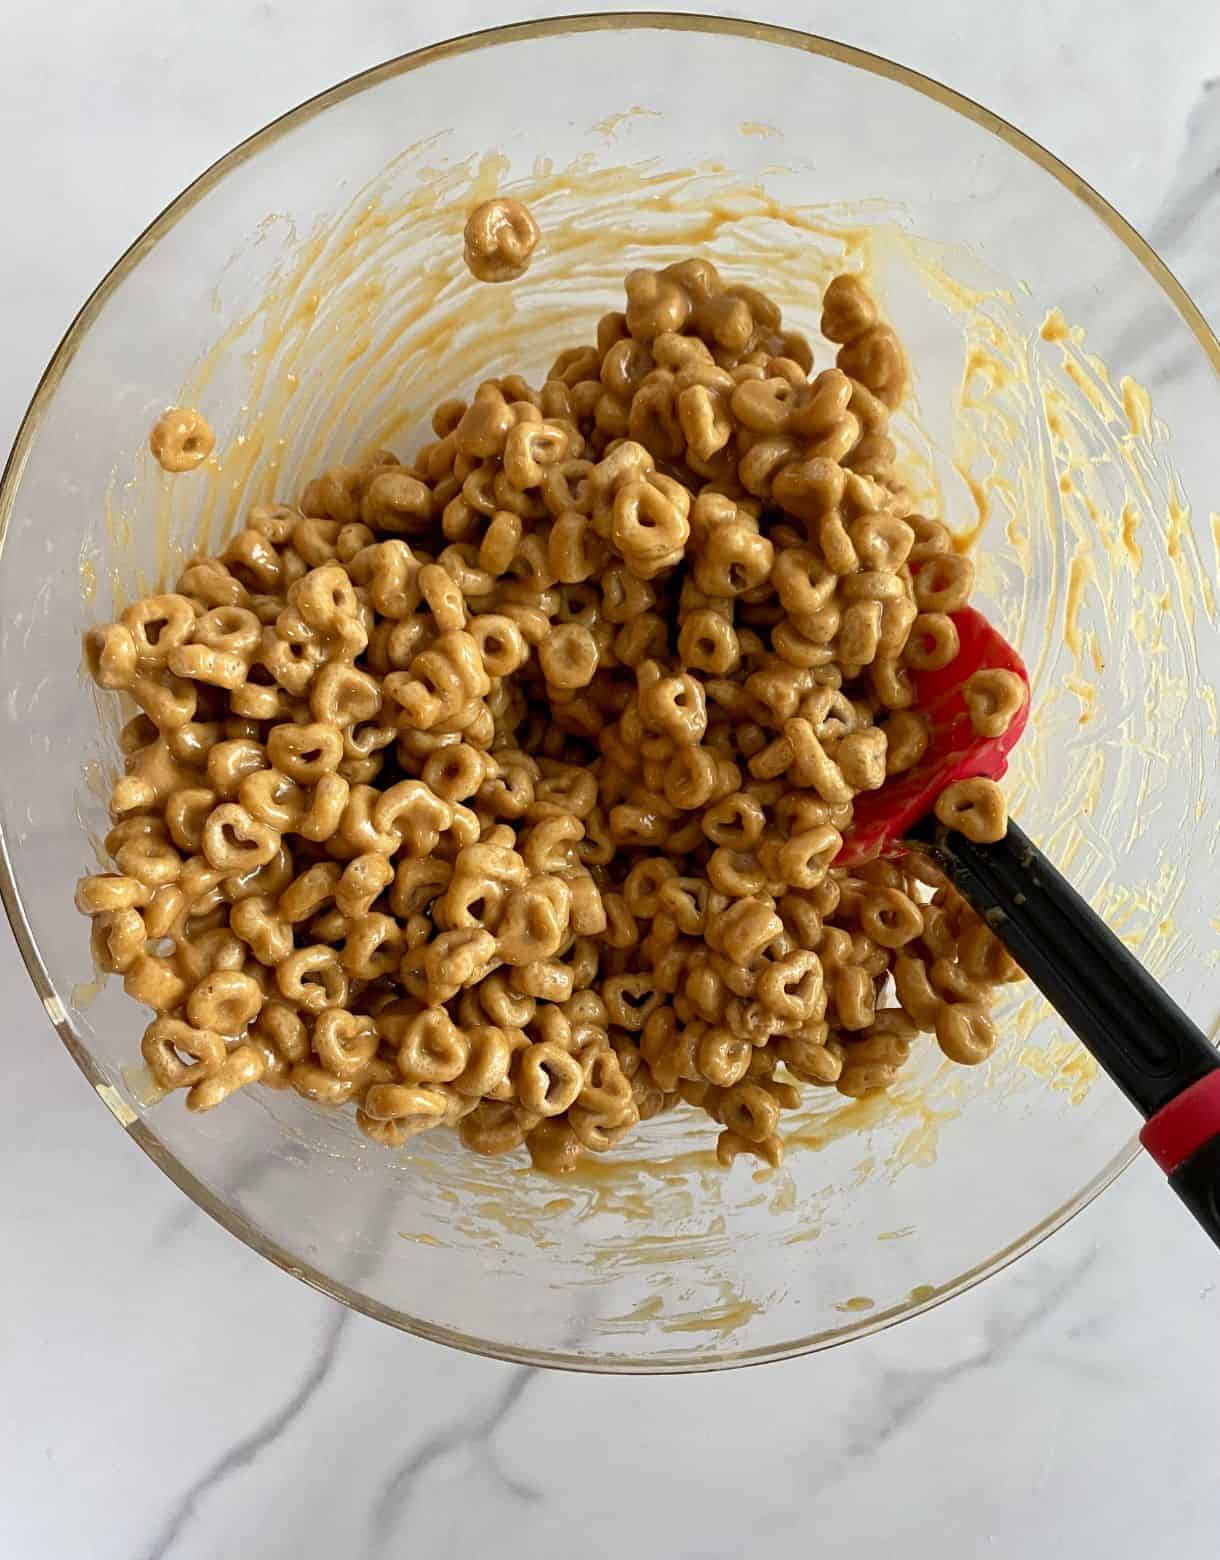 A bowl of Cheerios coated and stirred with a peanut butter honey mixture.